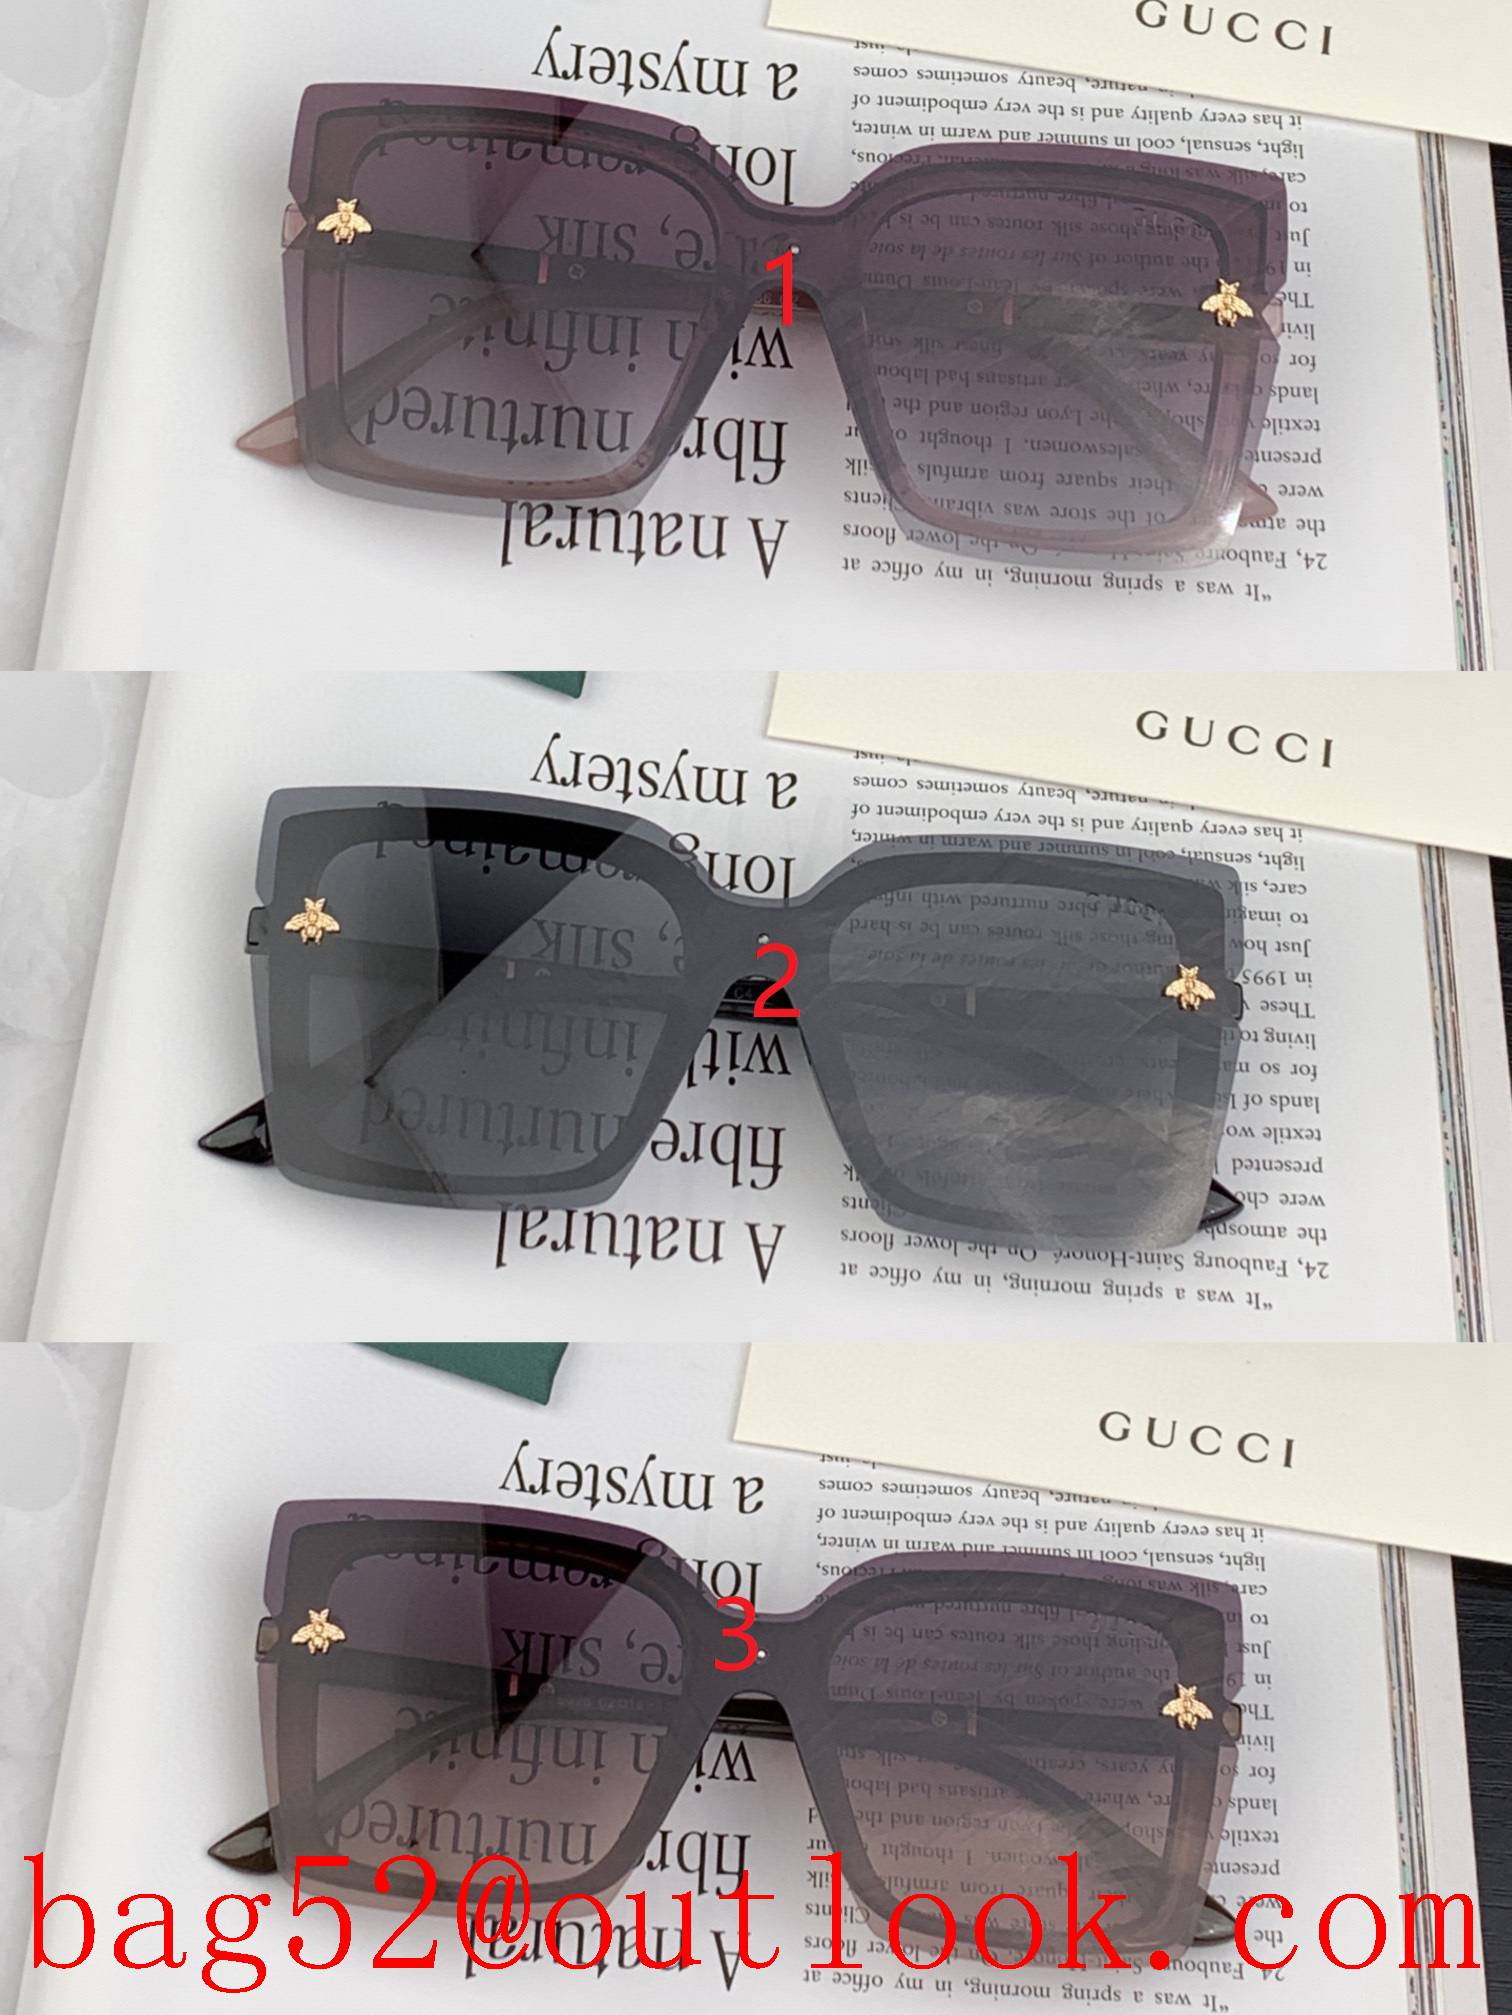 Gucci latest spring and summer sunglasses